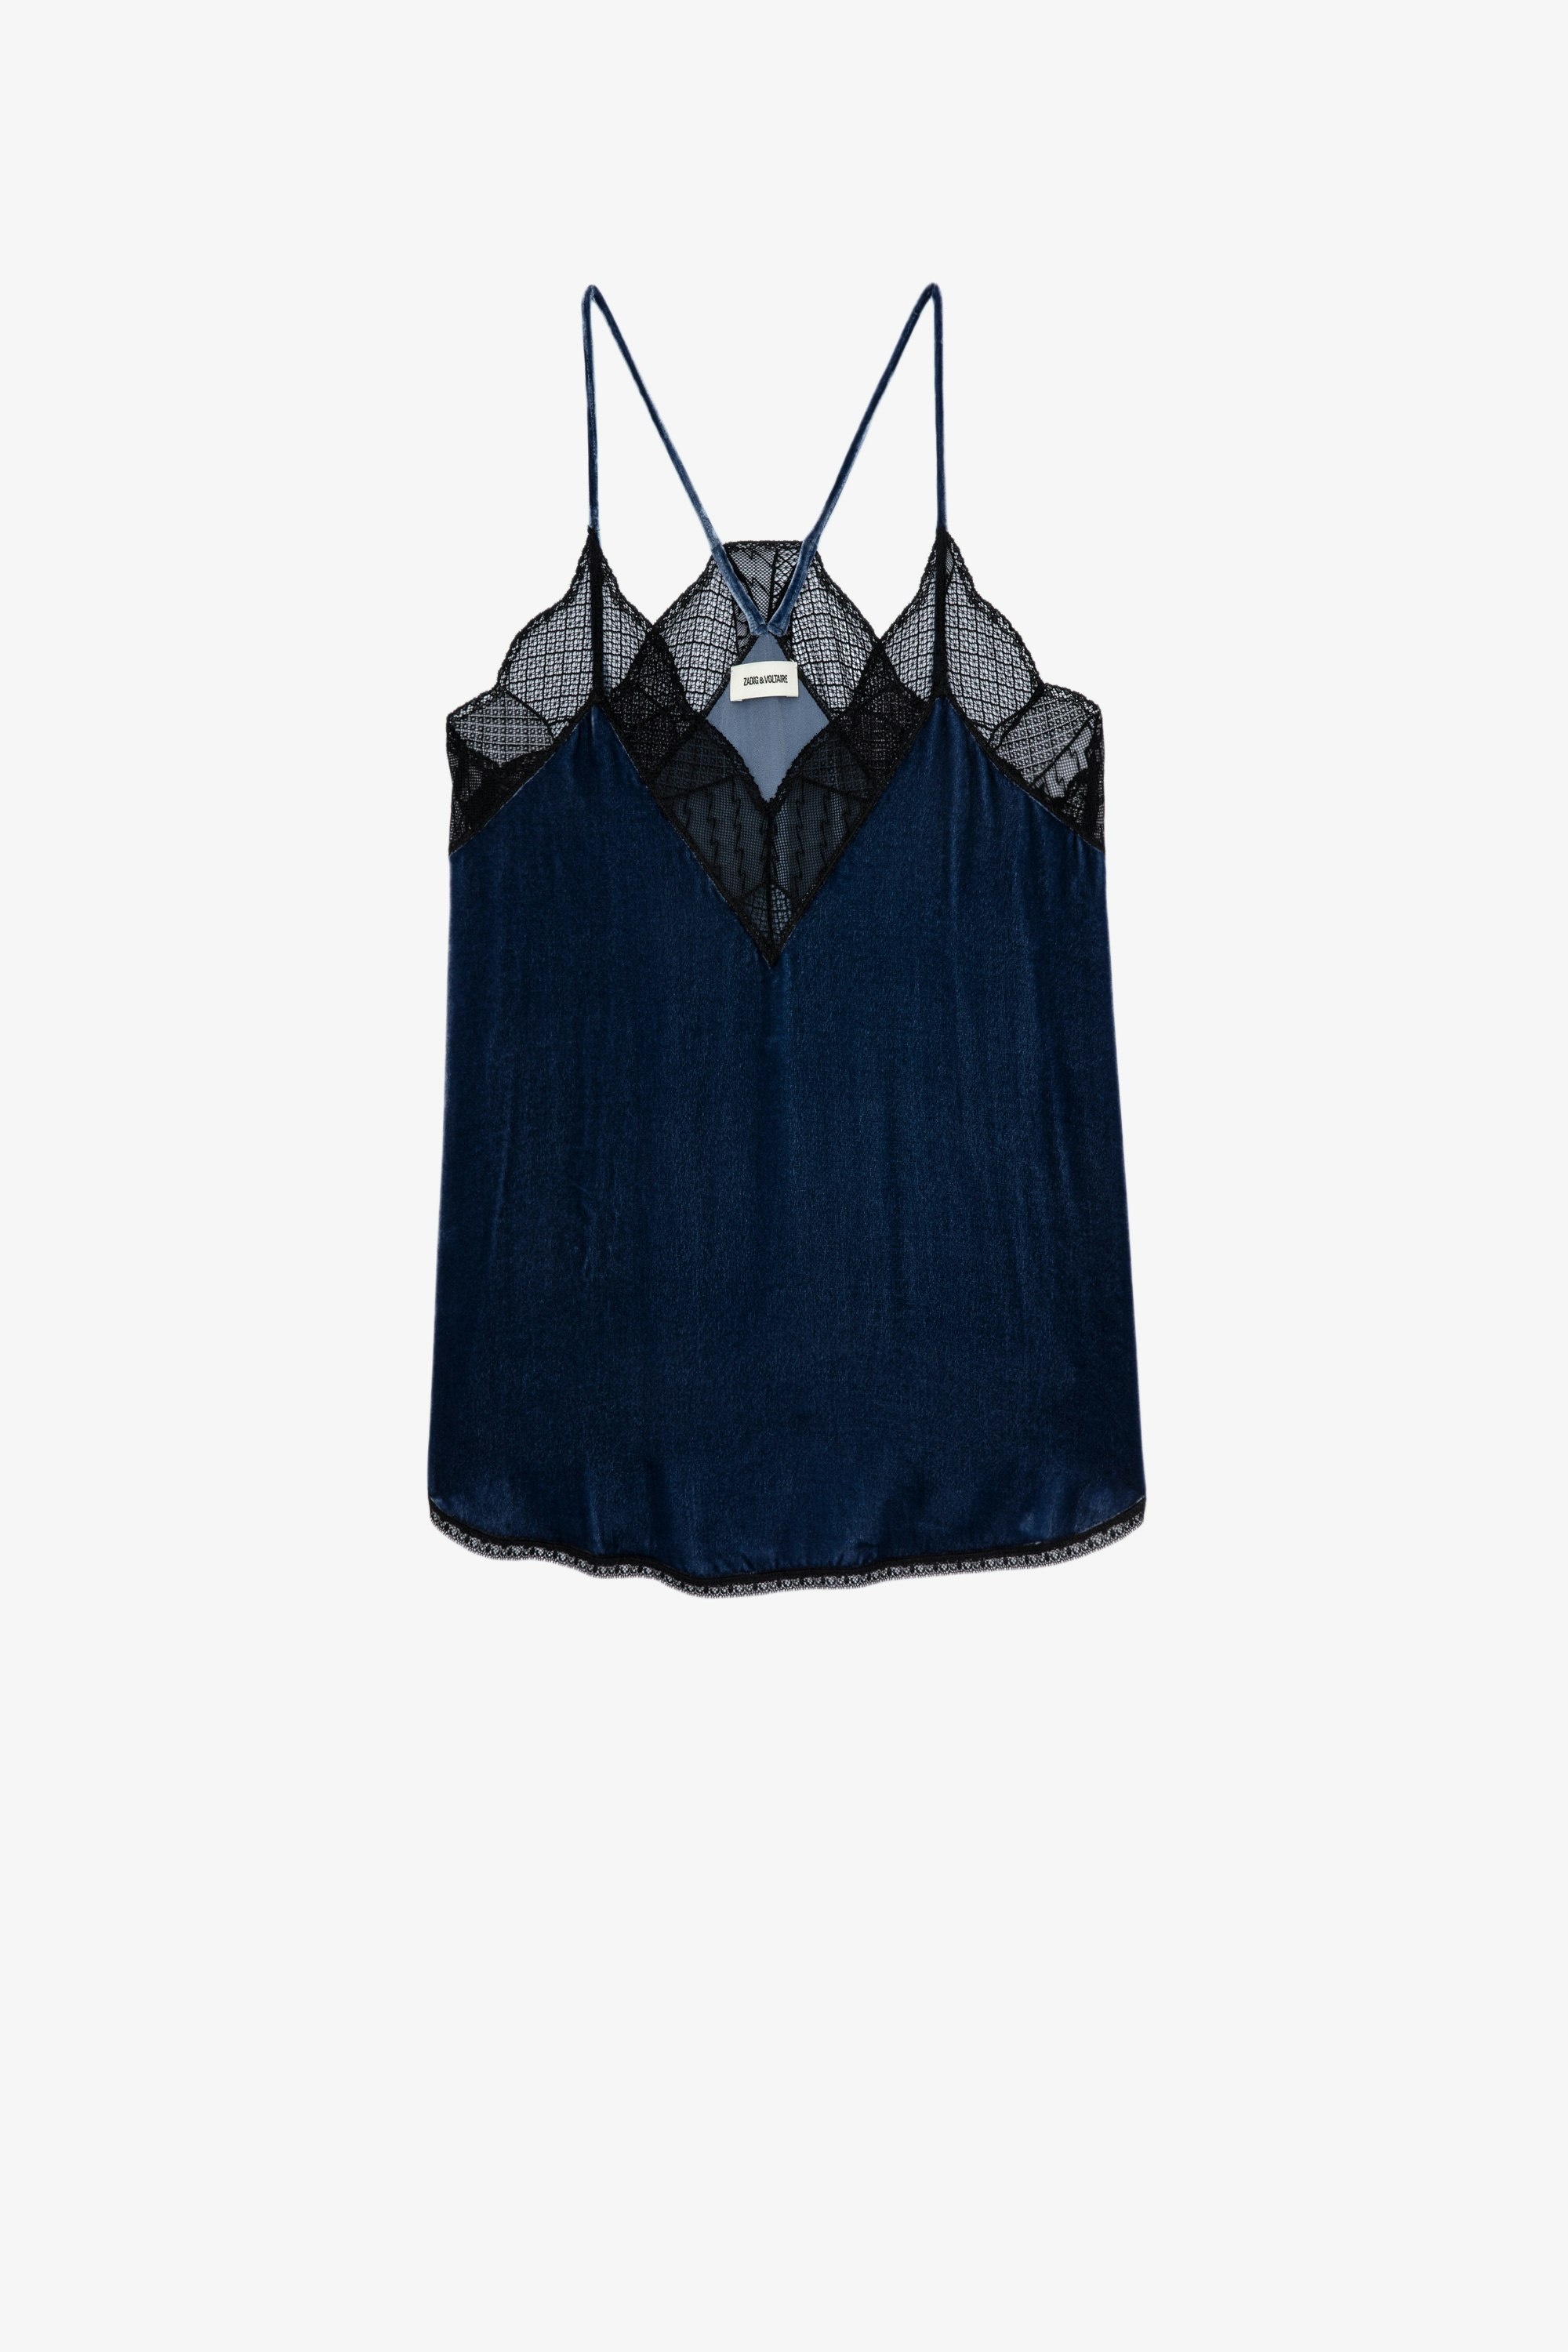 Christy キャミソール Women’s blue velvet camisole with lace trim 